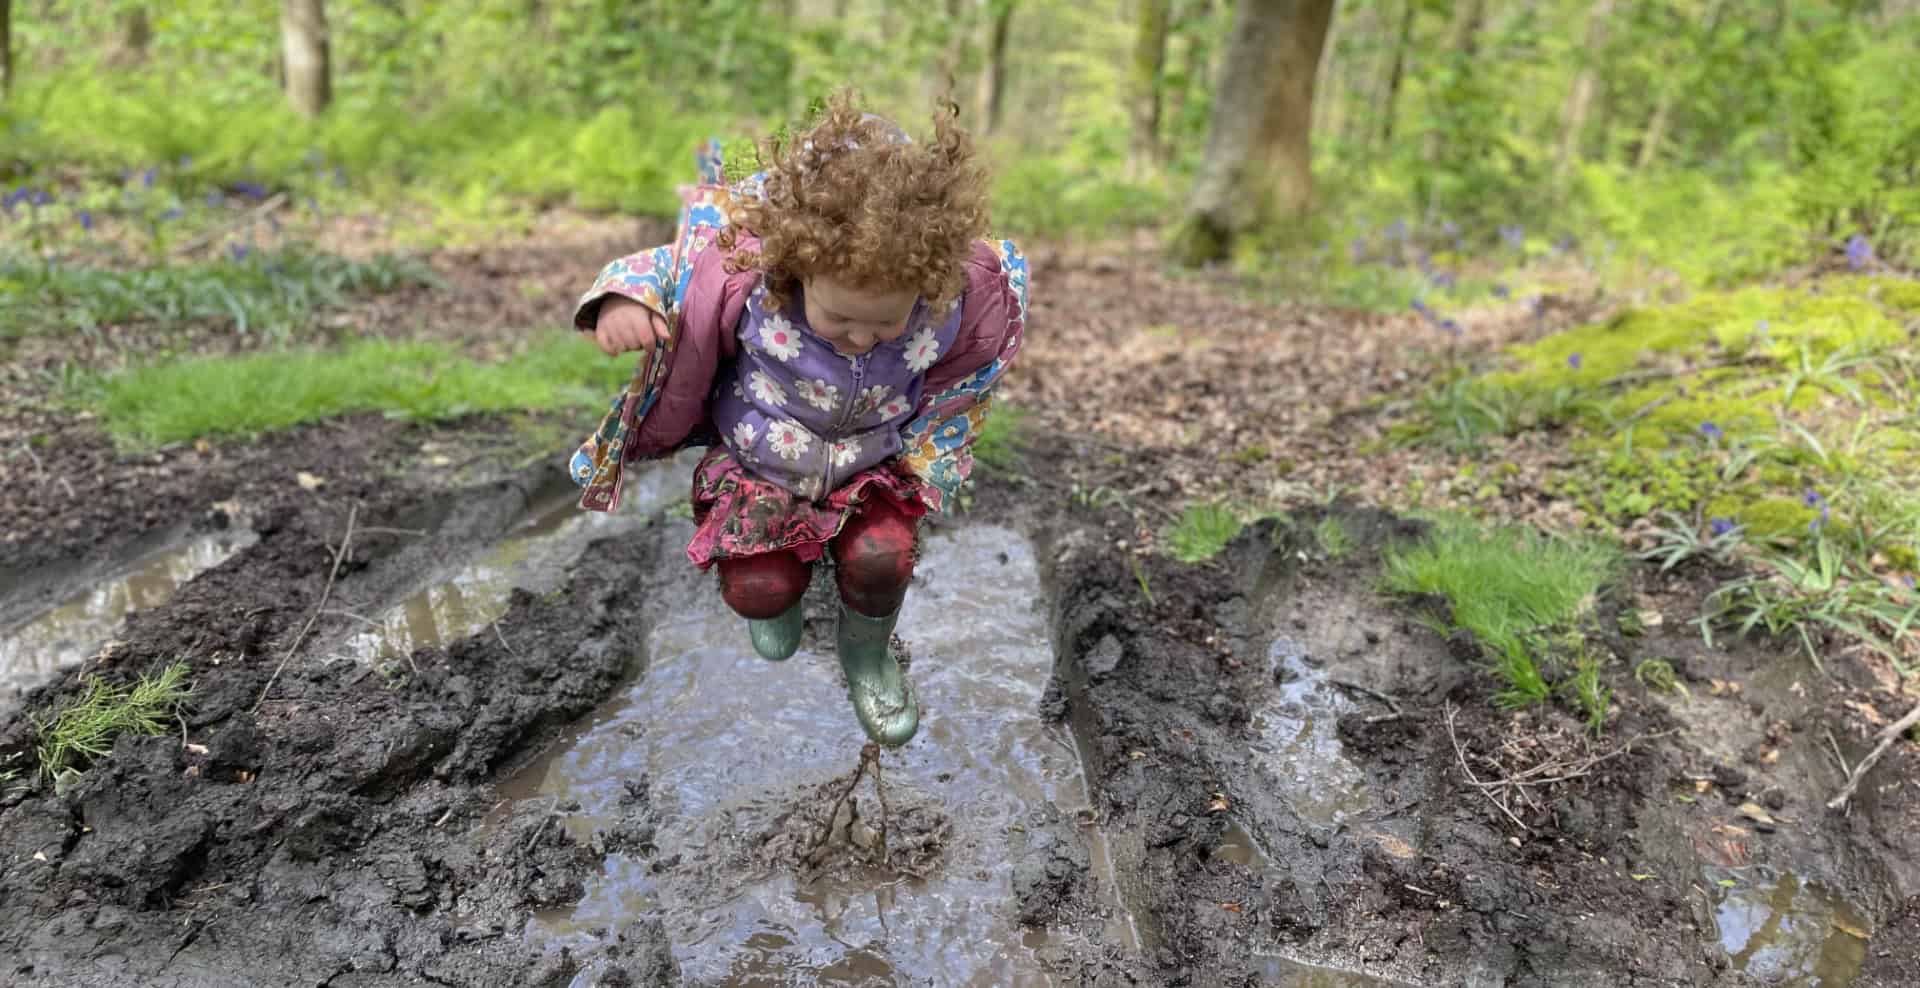 cassie jumping in the mud by Francesca Croft